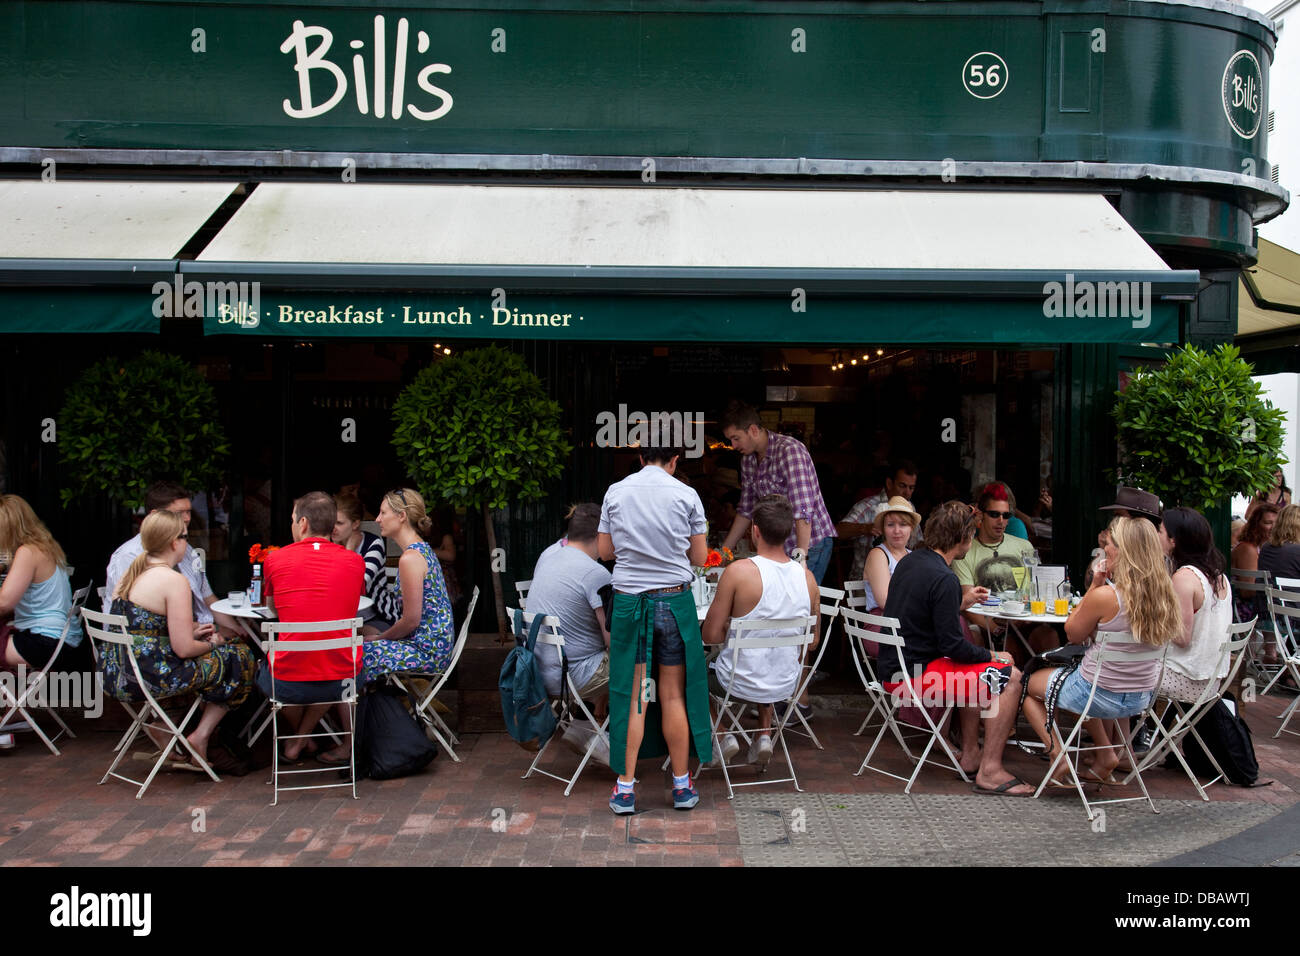 Bill's Cafe/Restaurant, Lewes, Sussex, England Stock Photo